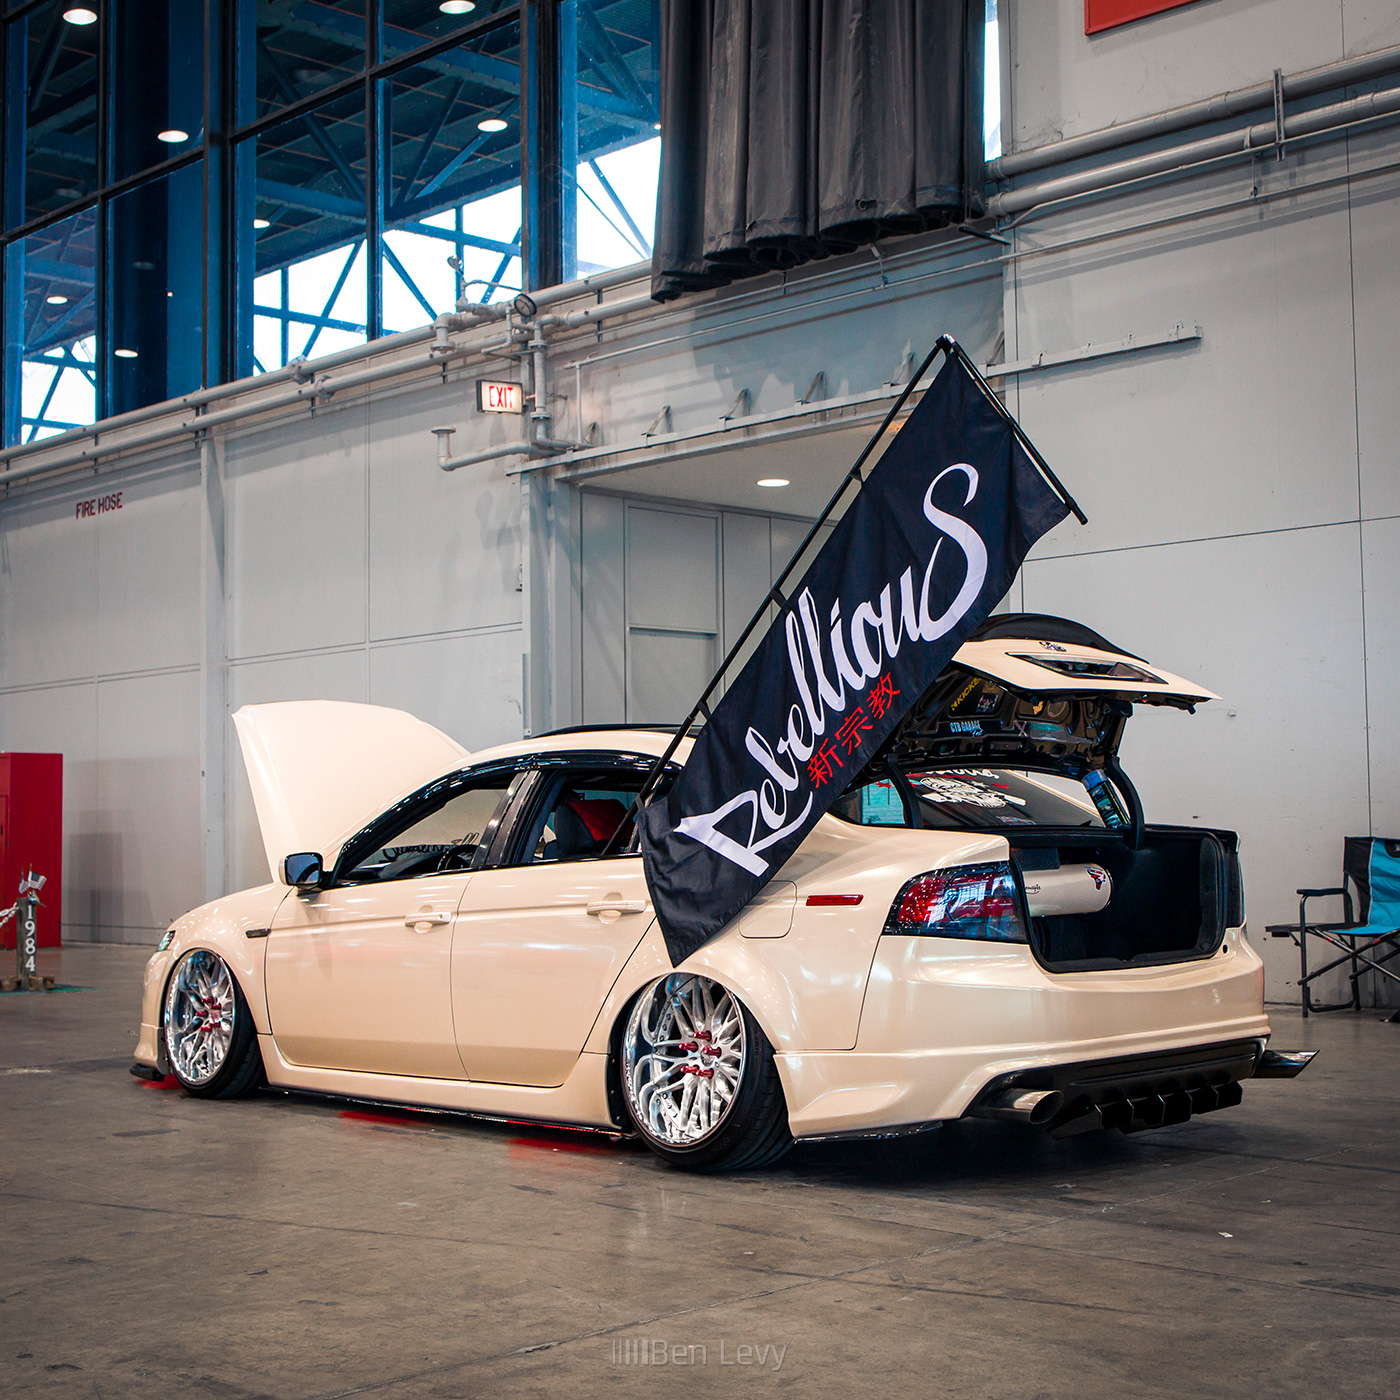 Bagged Acura TL at Lowrider Chicago Super Show